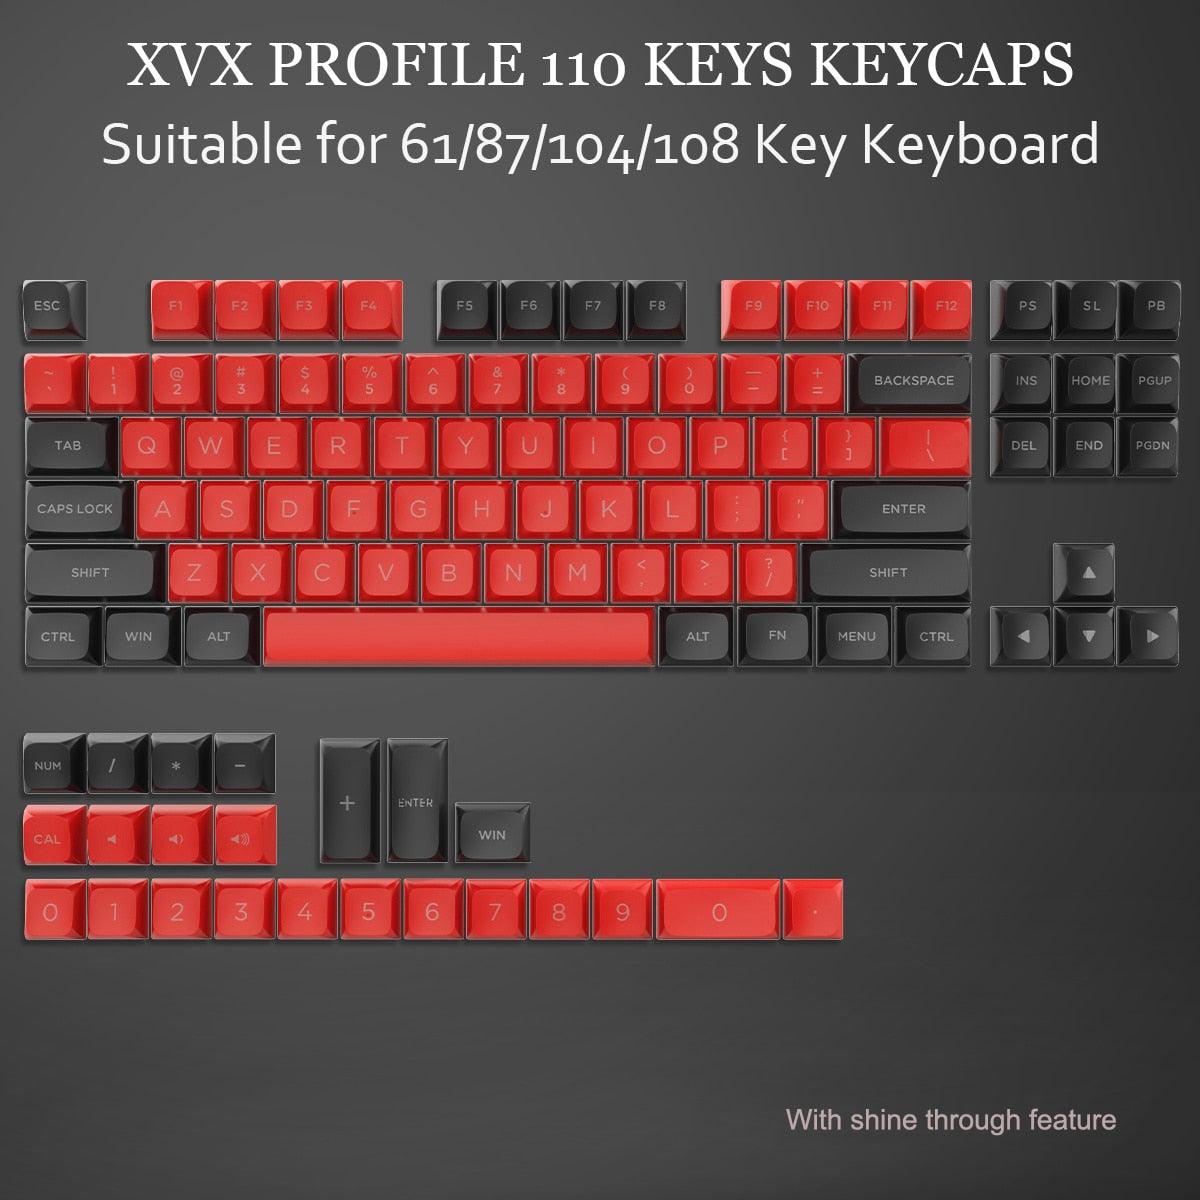 189 Key PBT Double-shot Black Grey XVX Profile Keycaps Key Cap for MX Switches Womier GK61 Anne Pro 2 Mechanical Gaming Keyboard